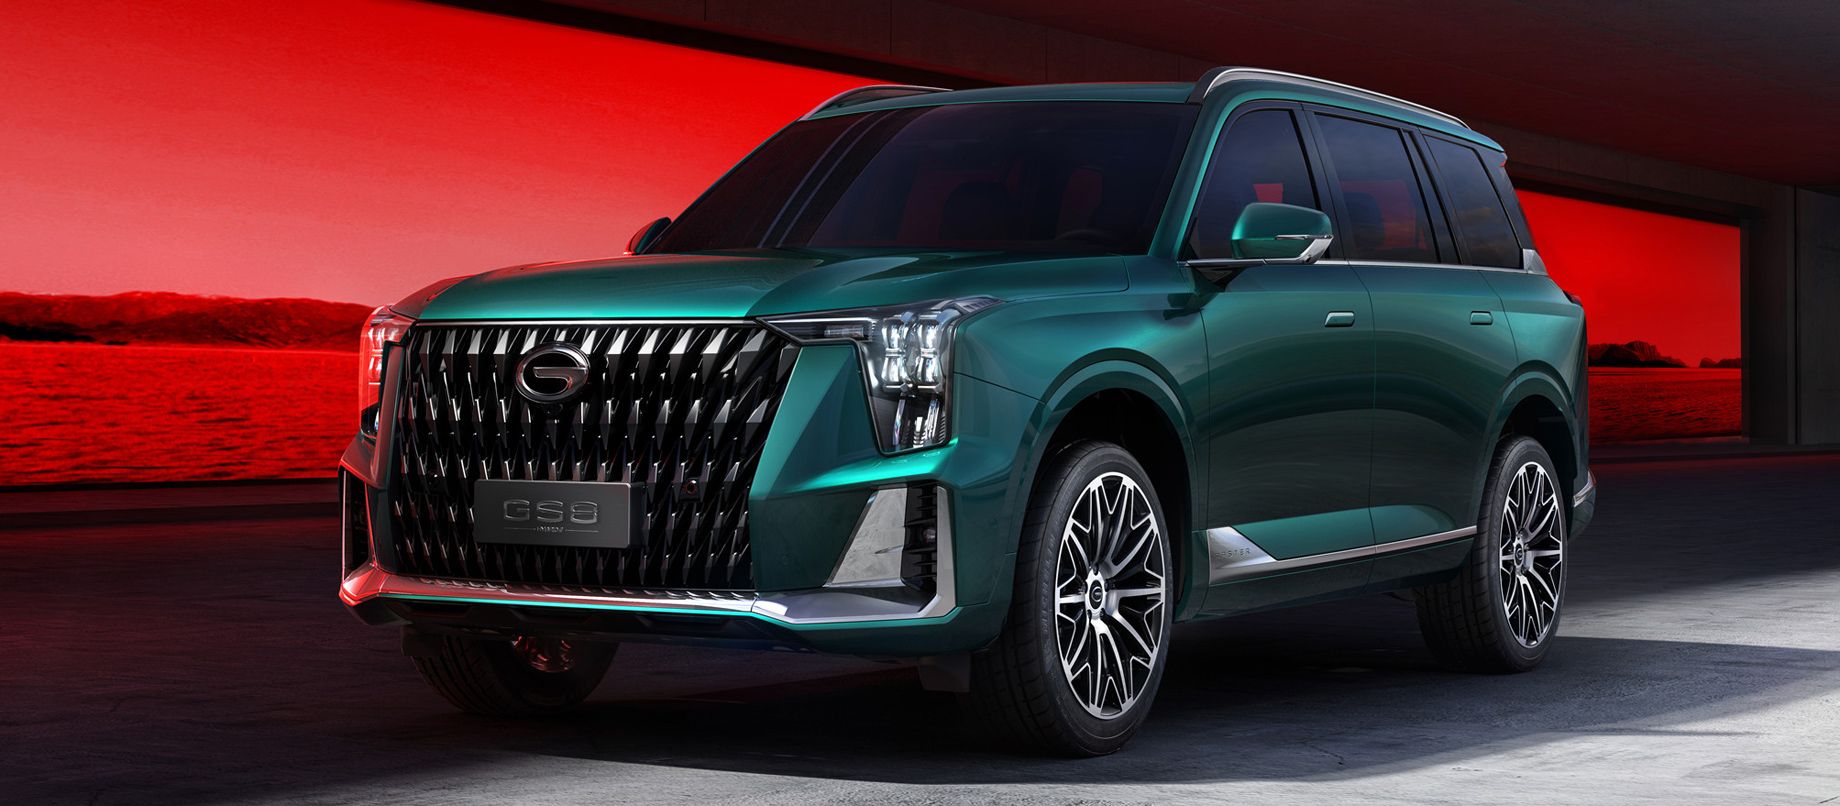 2022 GAC GS8: The Chinese Full-Size SUV That Borrows Technology From Lexus